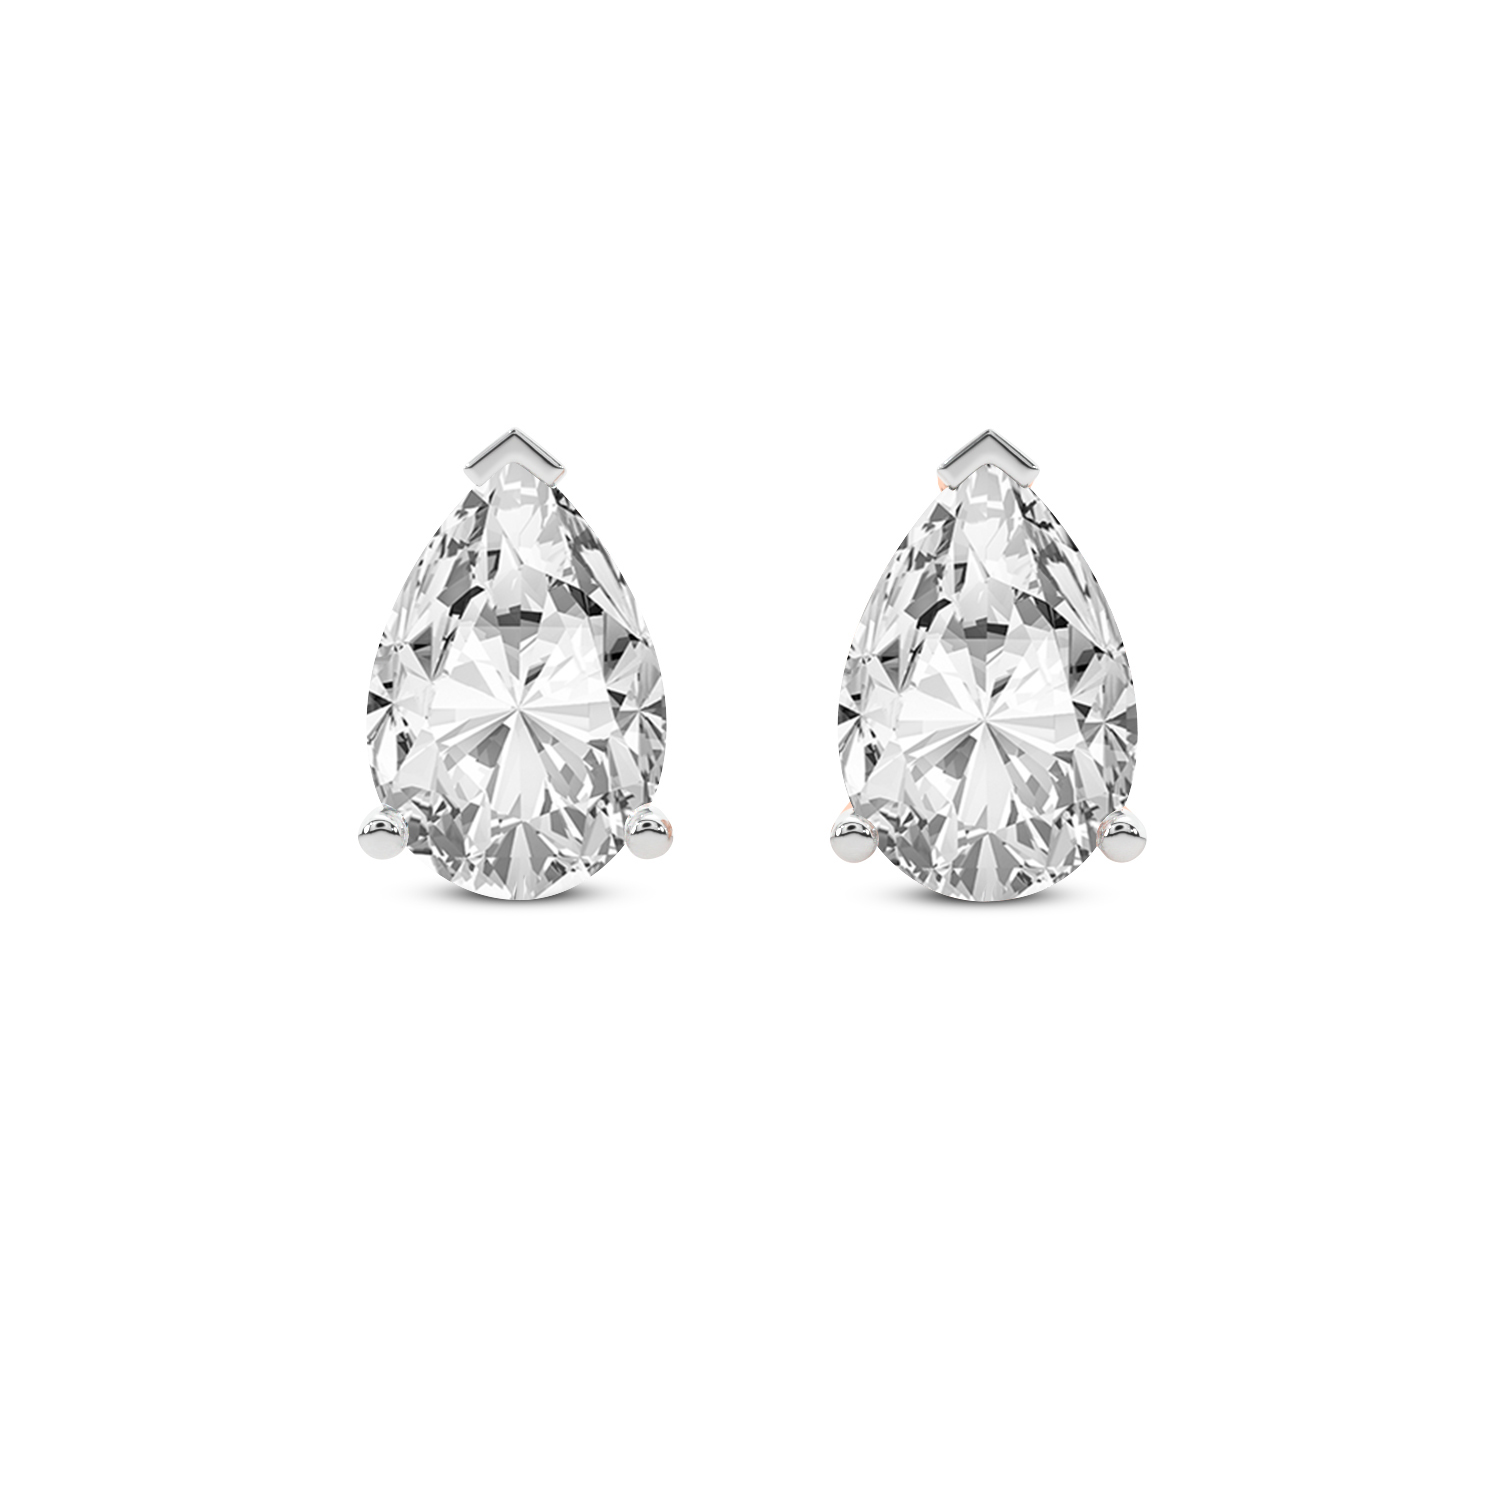 3 Prong Pear Lab Diamond Stud Earrings rose gold earring, small front view